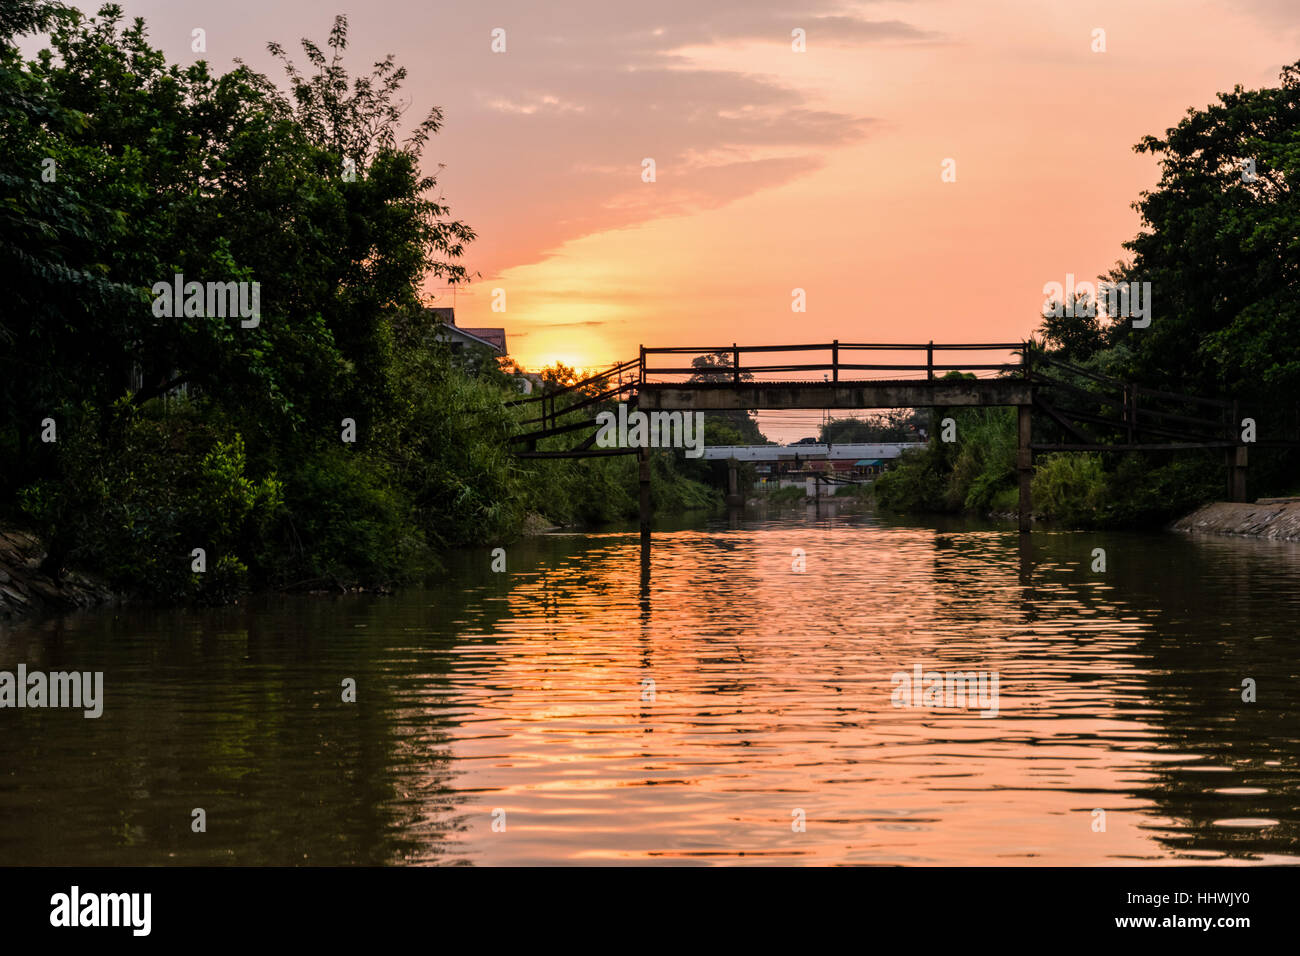 Landscape small canals, water is used as a thoroughfare rural and old wooden bridge for crossing the water during sunset in Phra Nakhon Si Ayutthaya Stock Photo